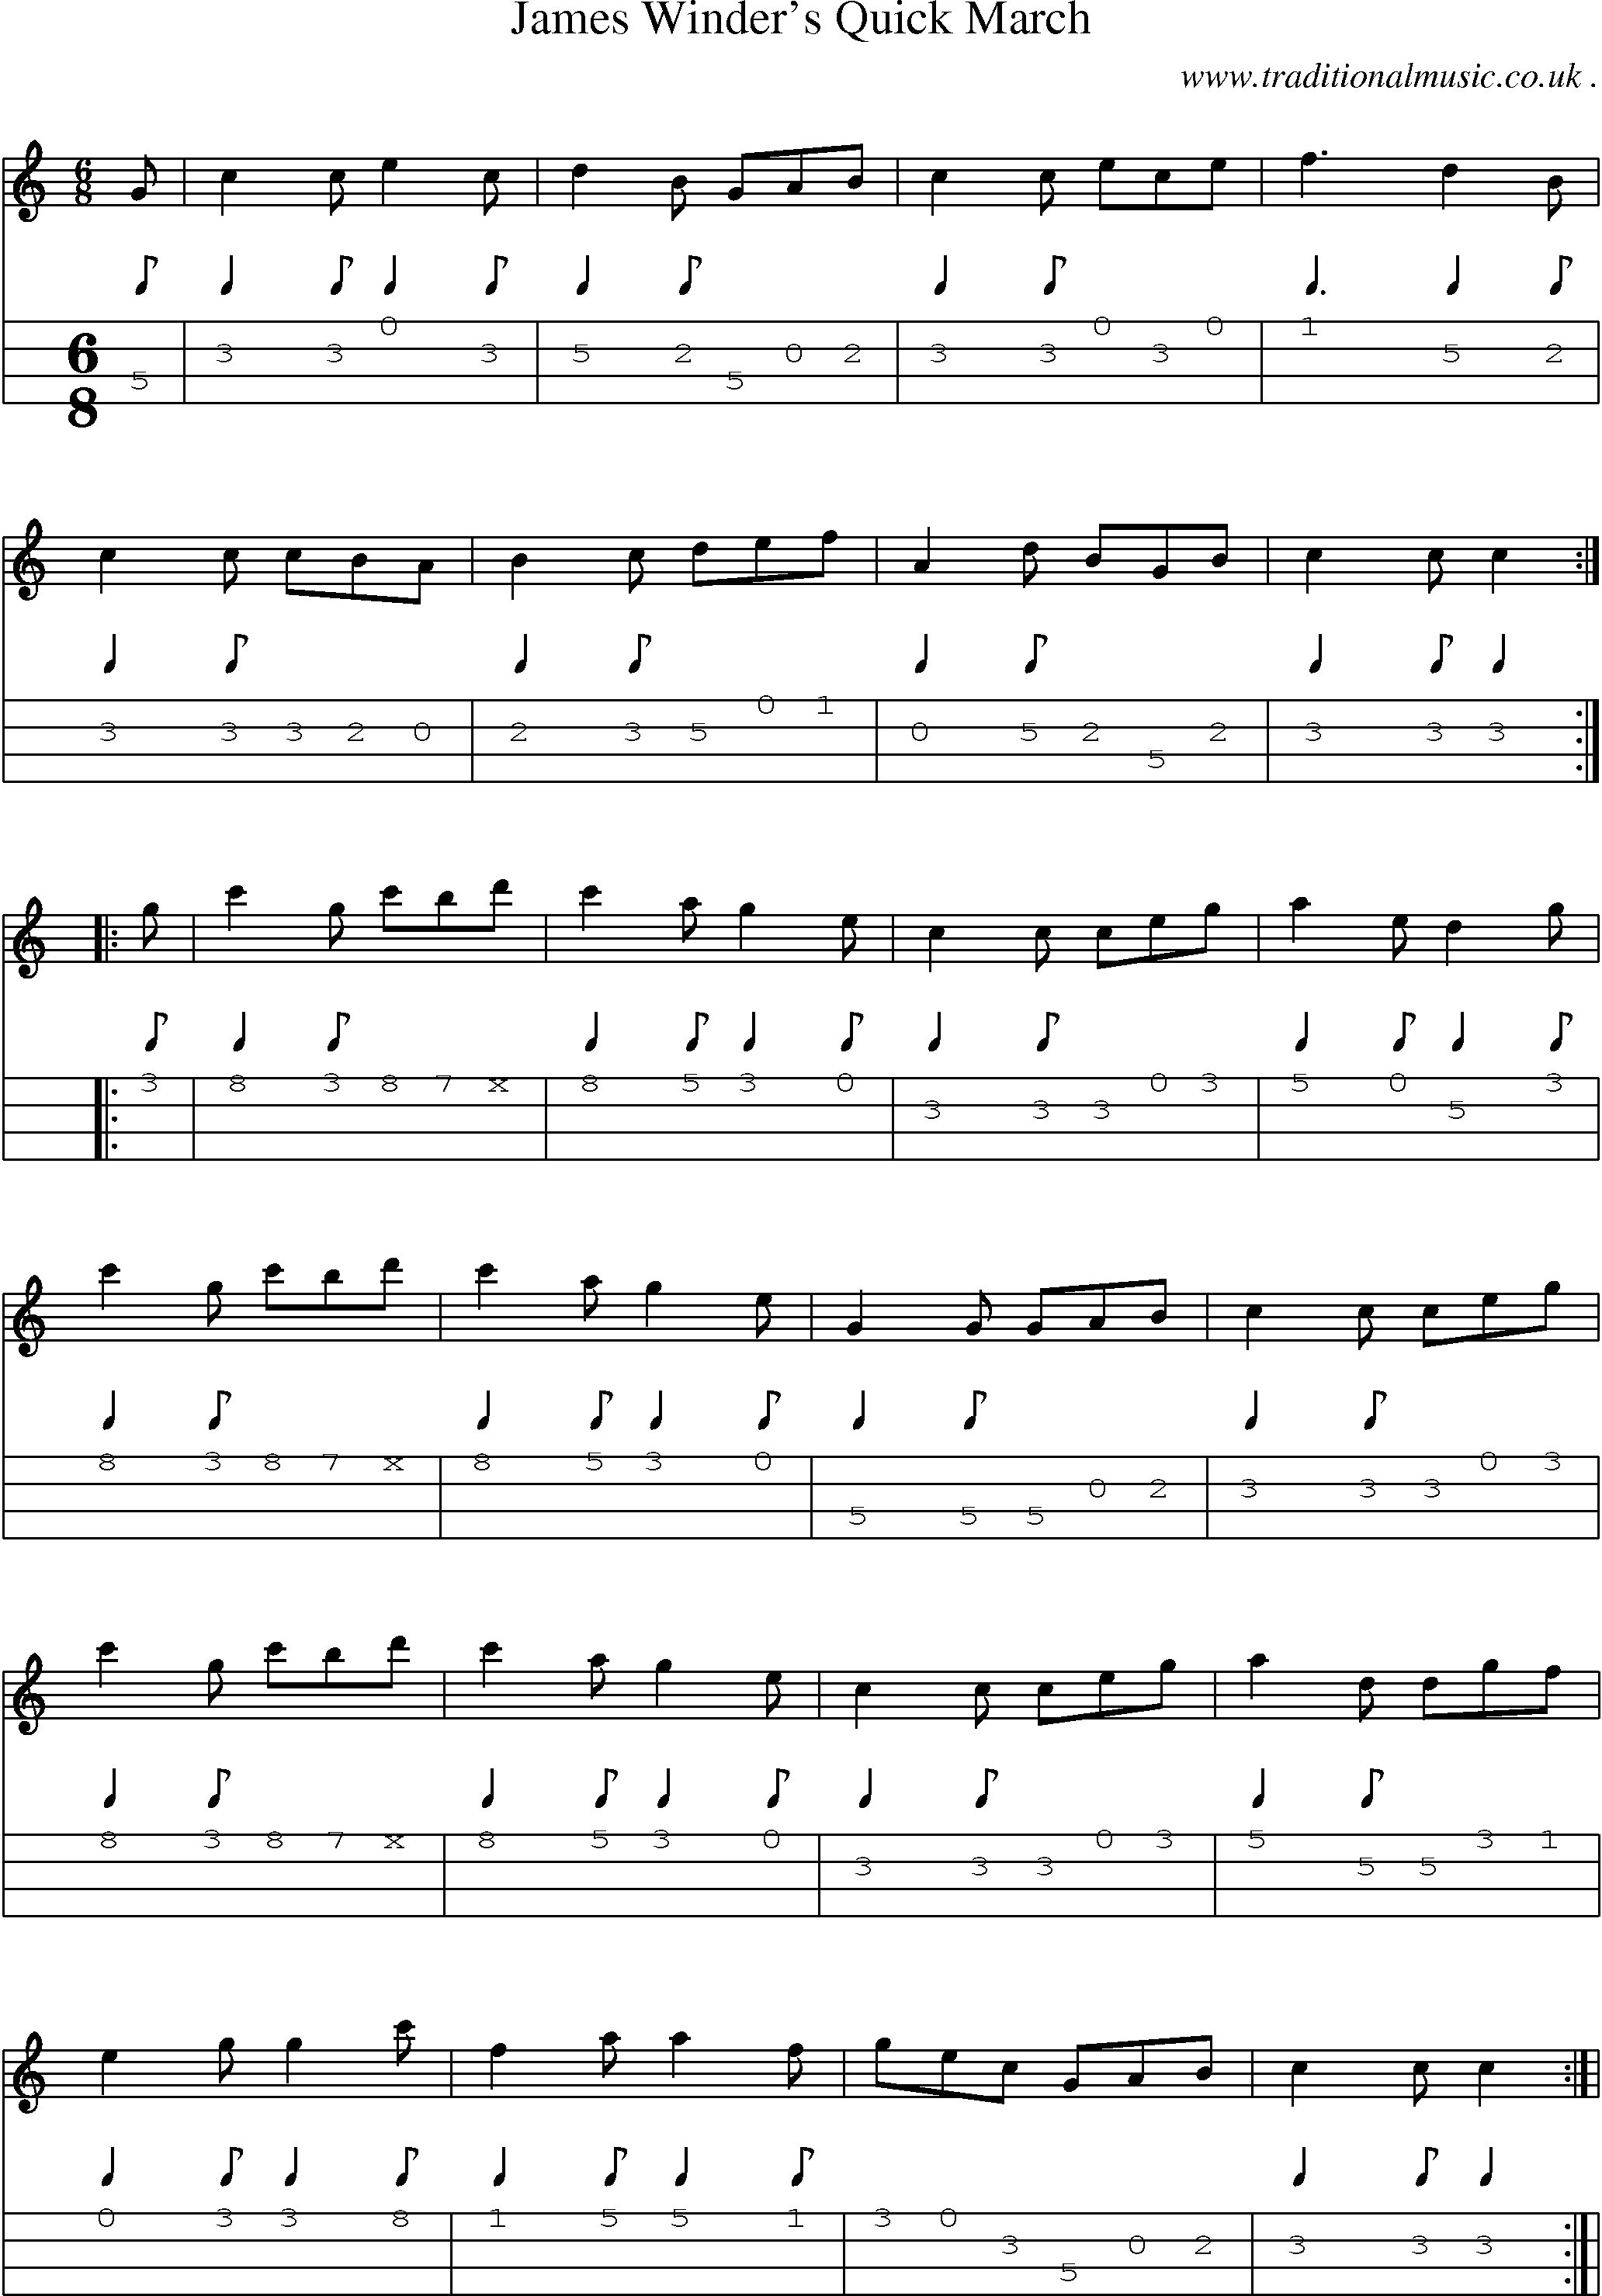 Sheet-Music and Mandolin Tabs for James Winders Quick March